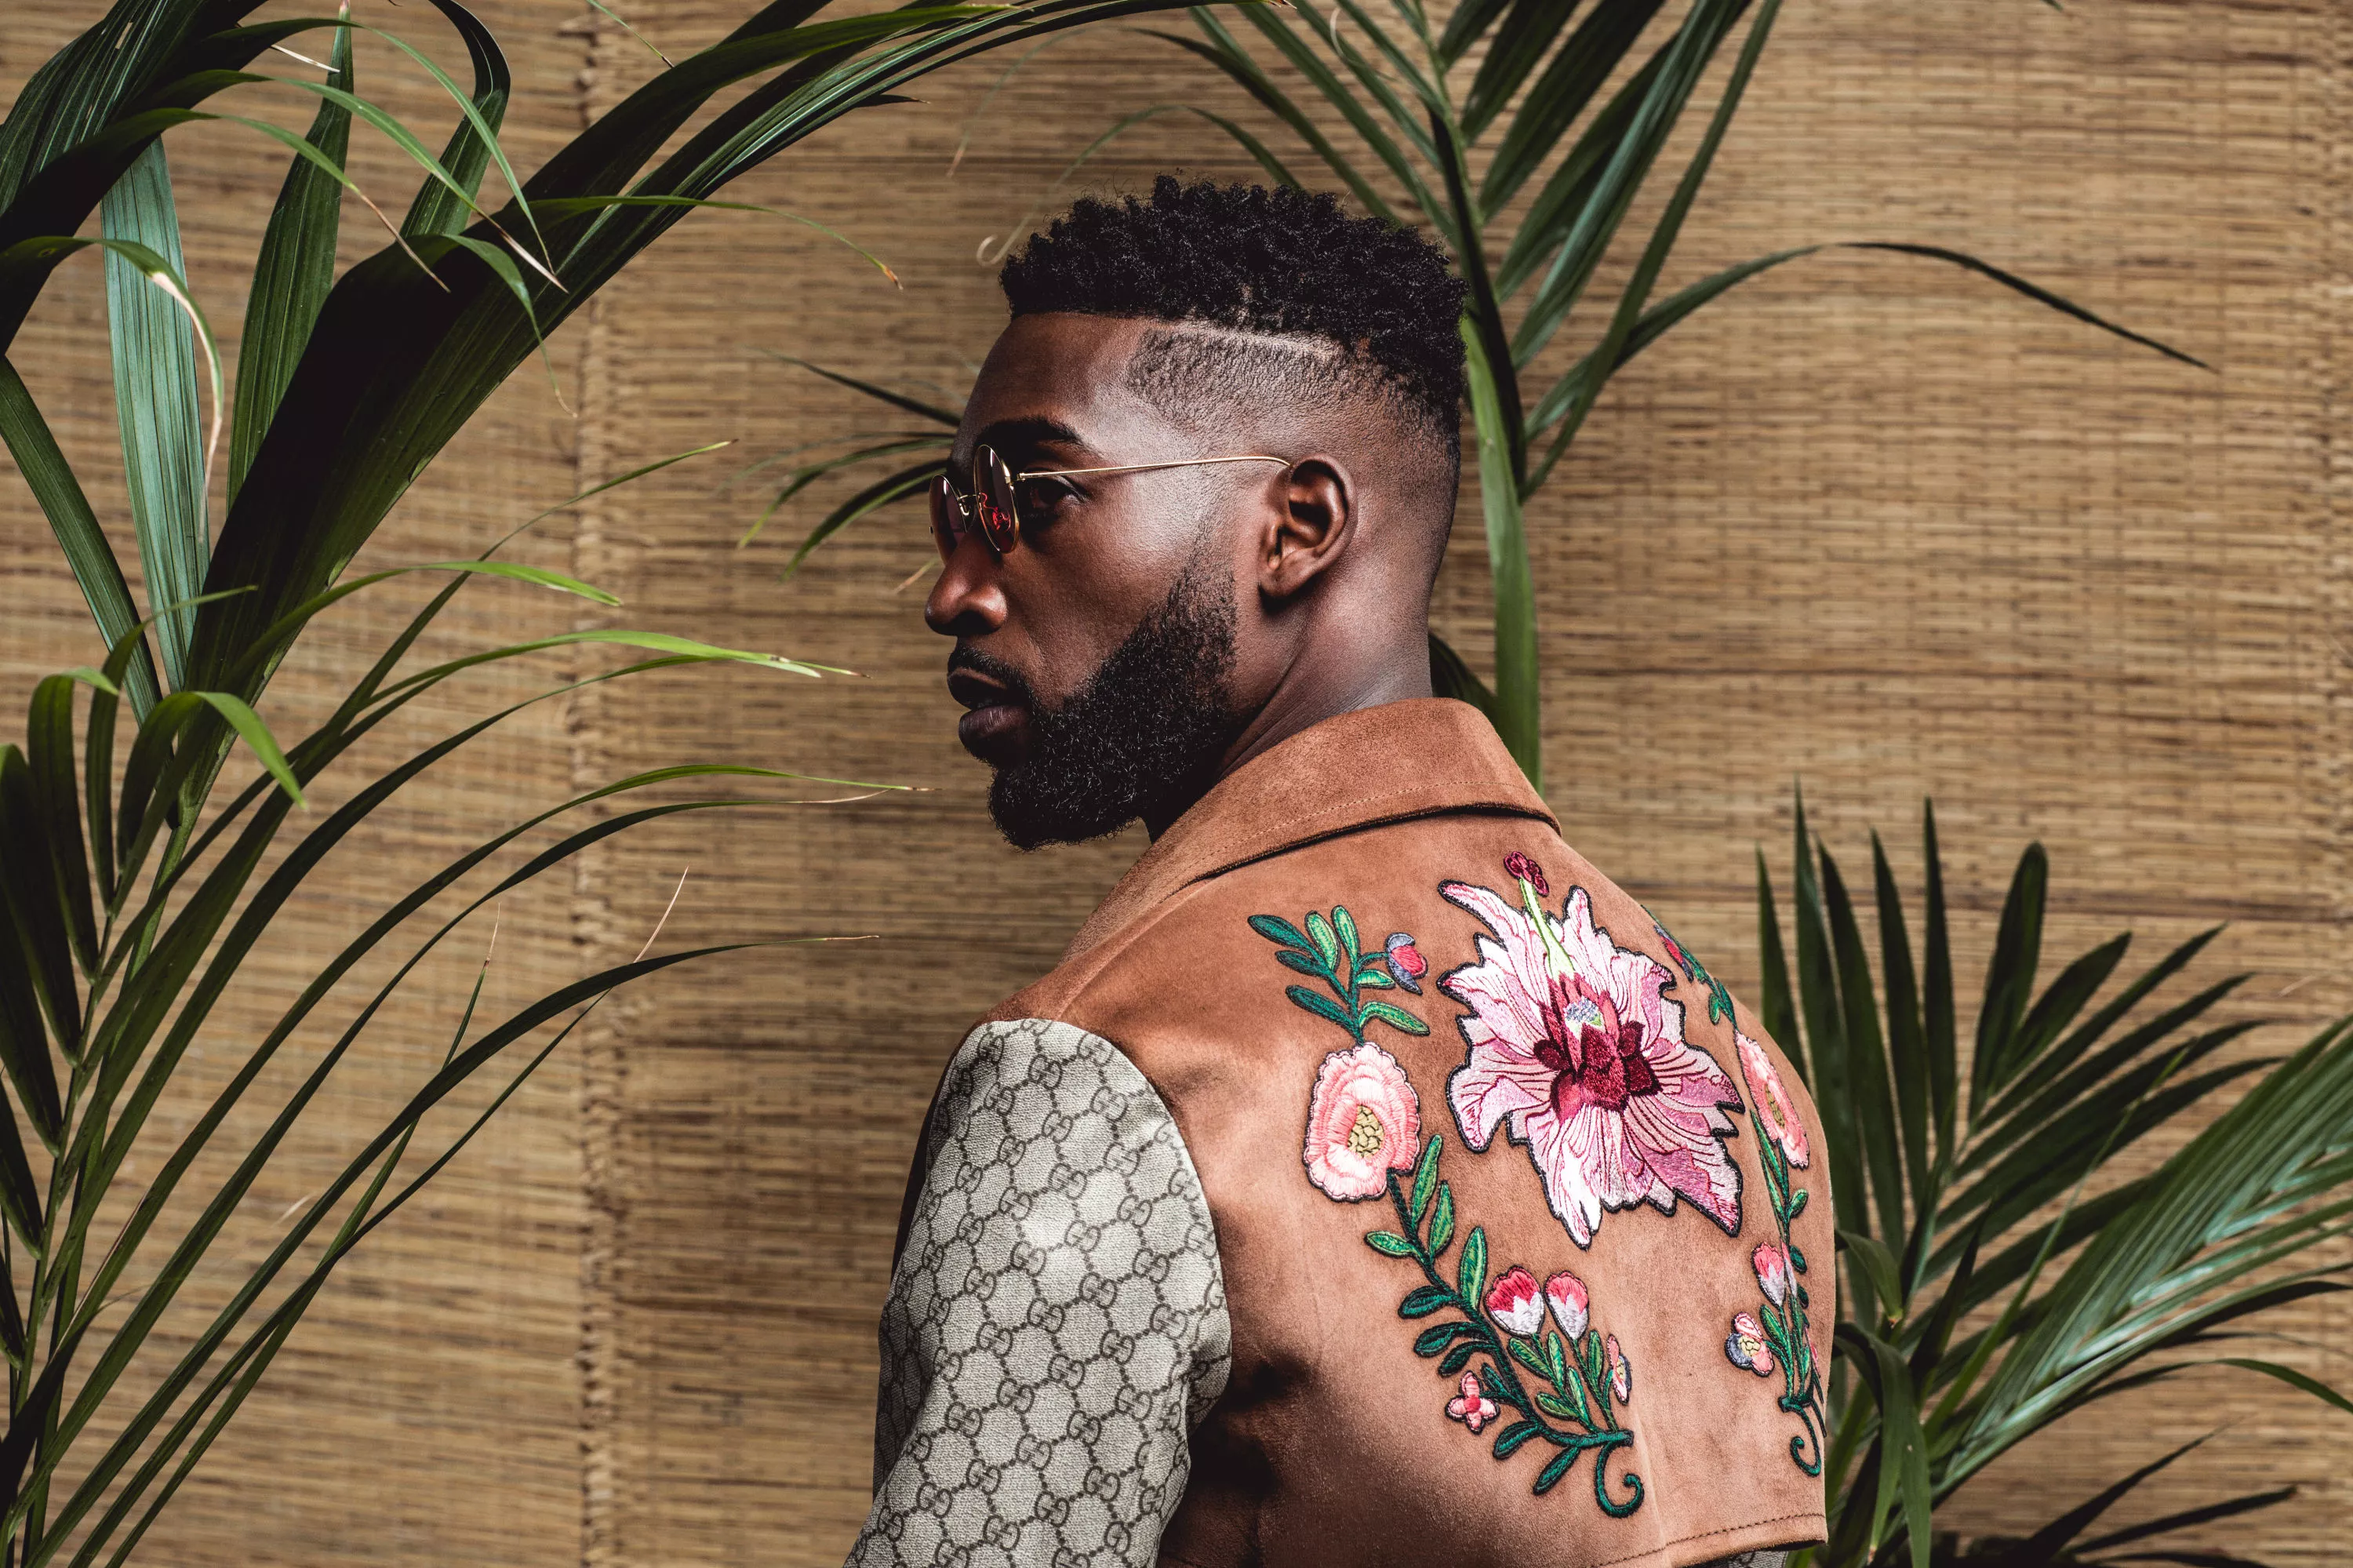 Ugens Topsify Track: Tinie Tempah er klar med "Text From Your Ex"